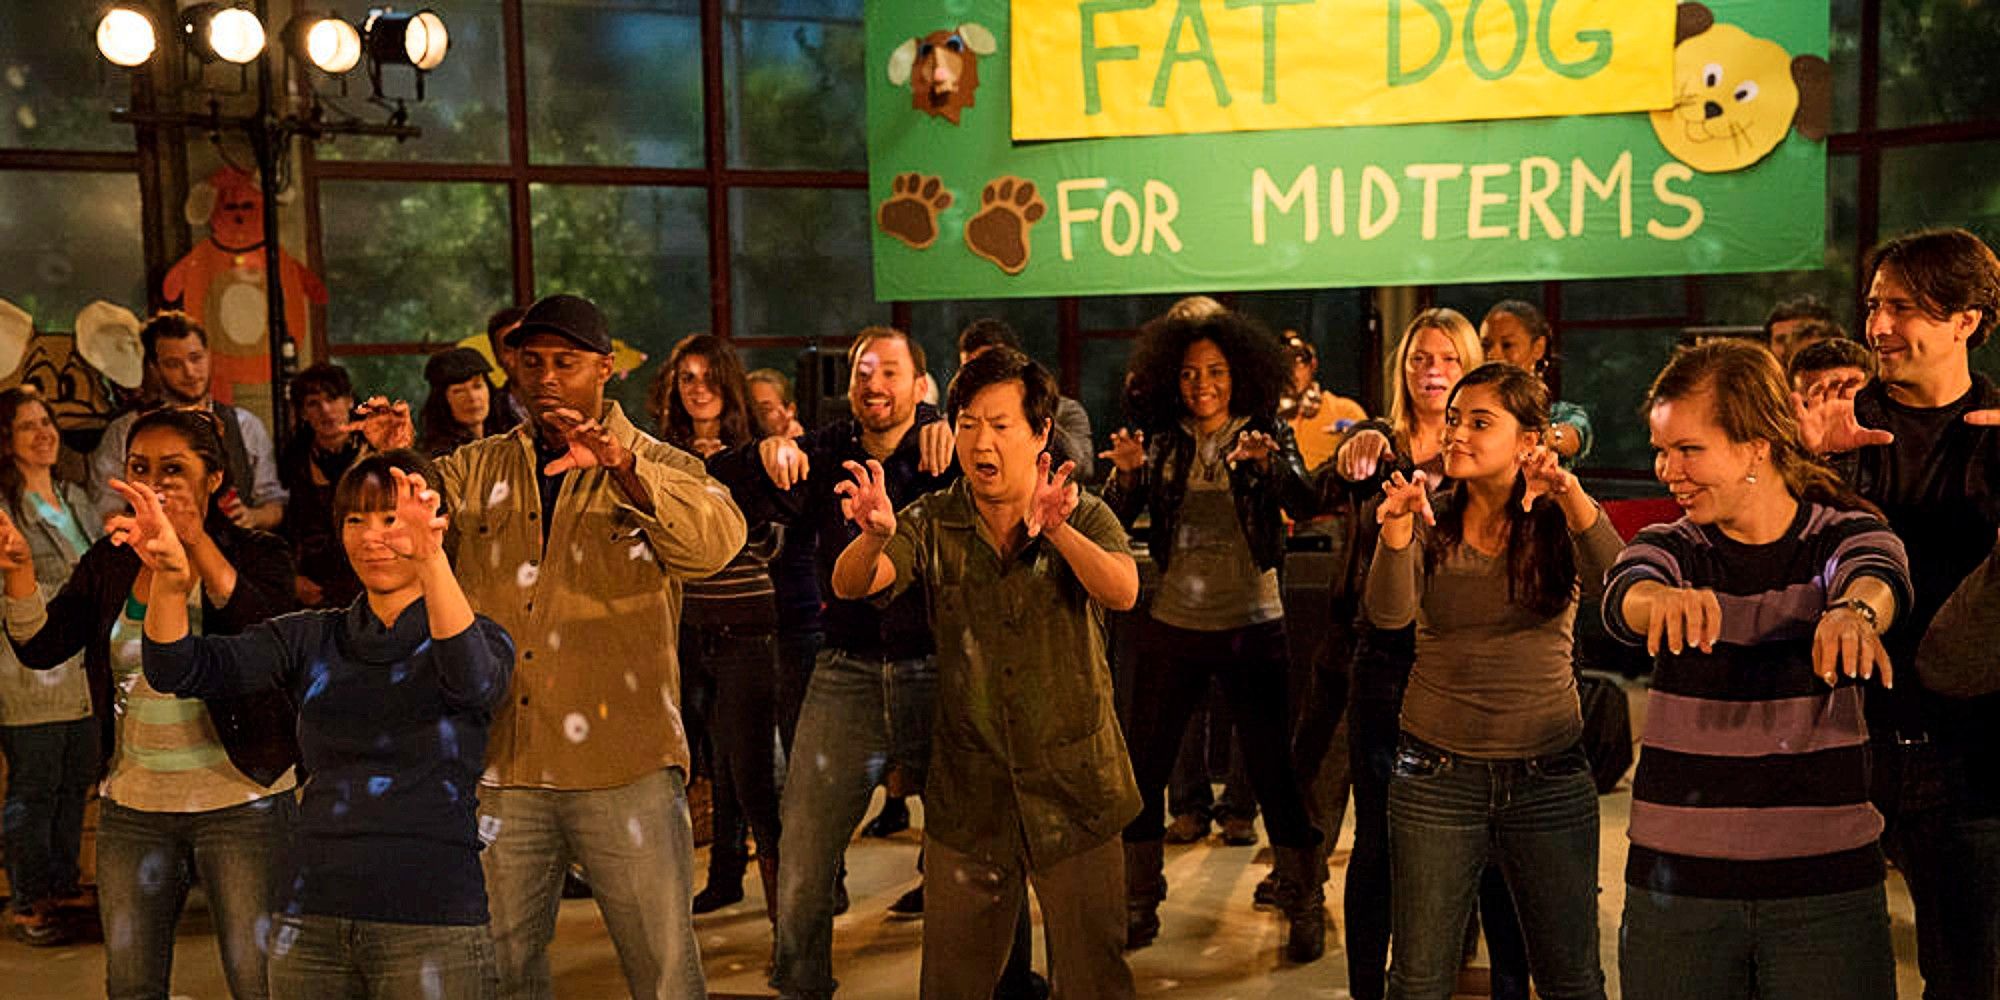 Chang leading the "Fat Dog" dance in Community in front of a sign that reads "FAT DOG FOR MIDTERMS"